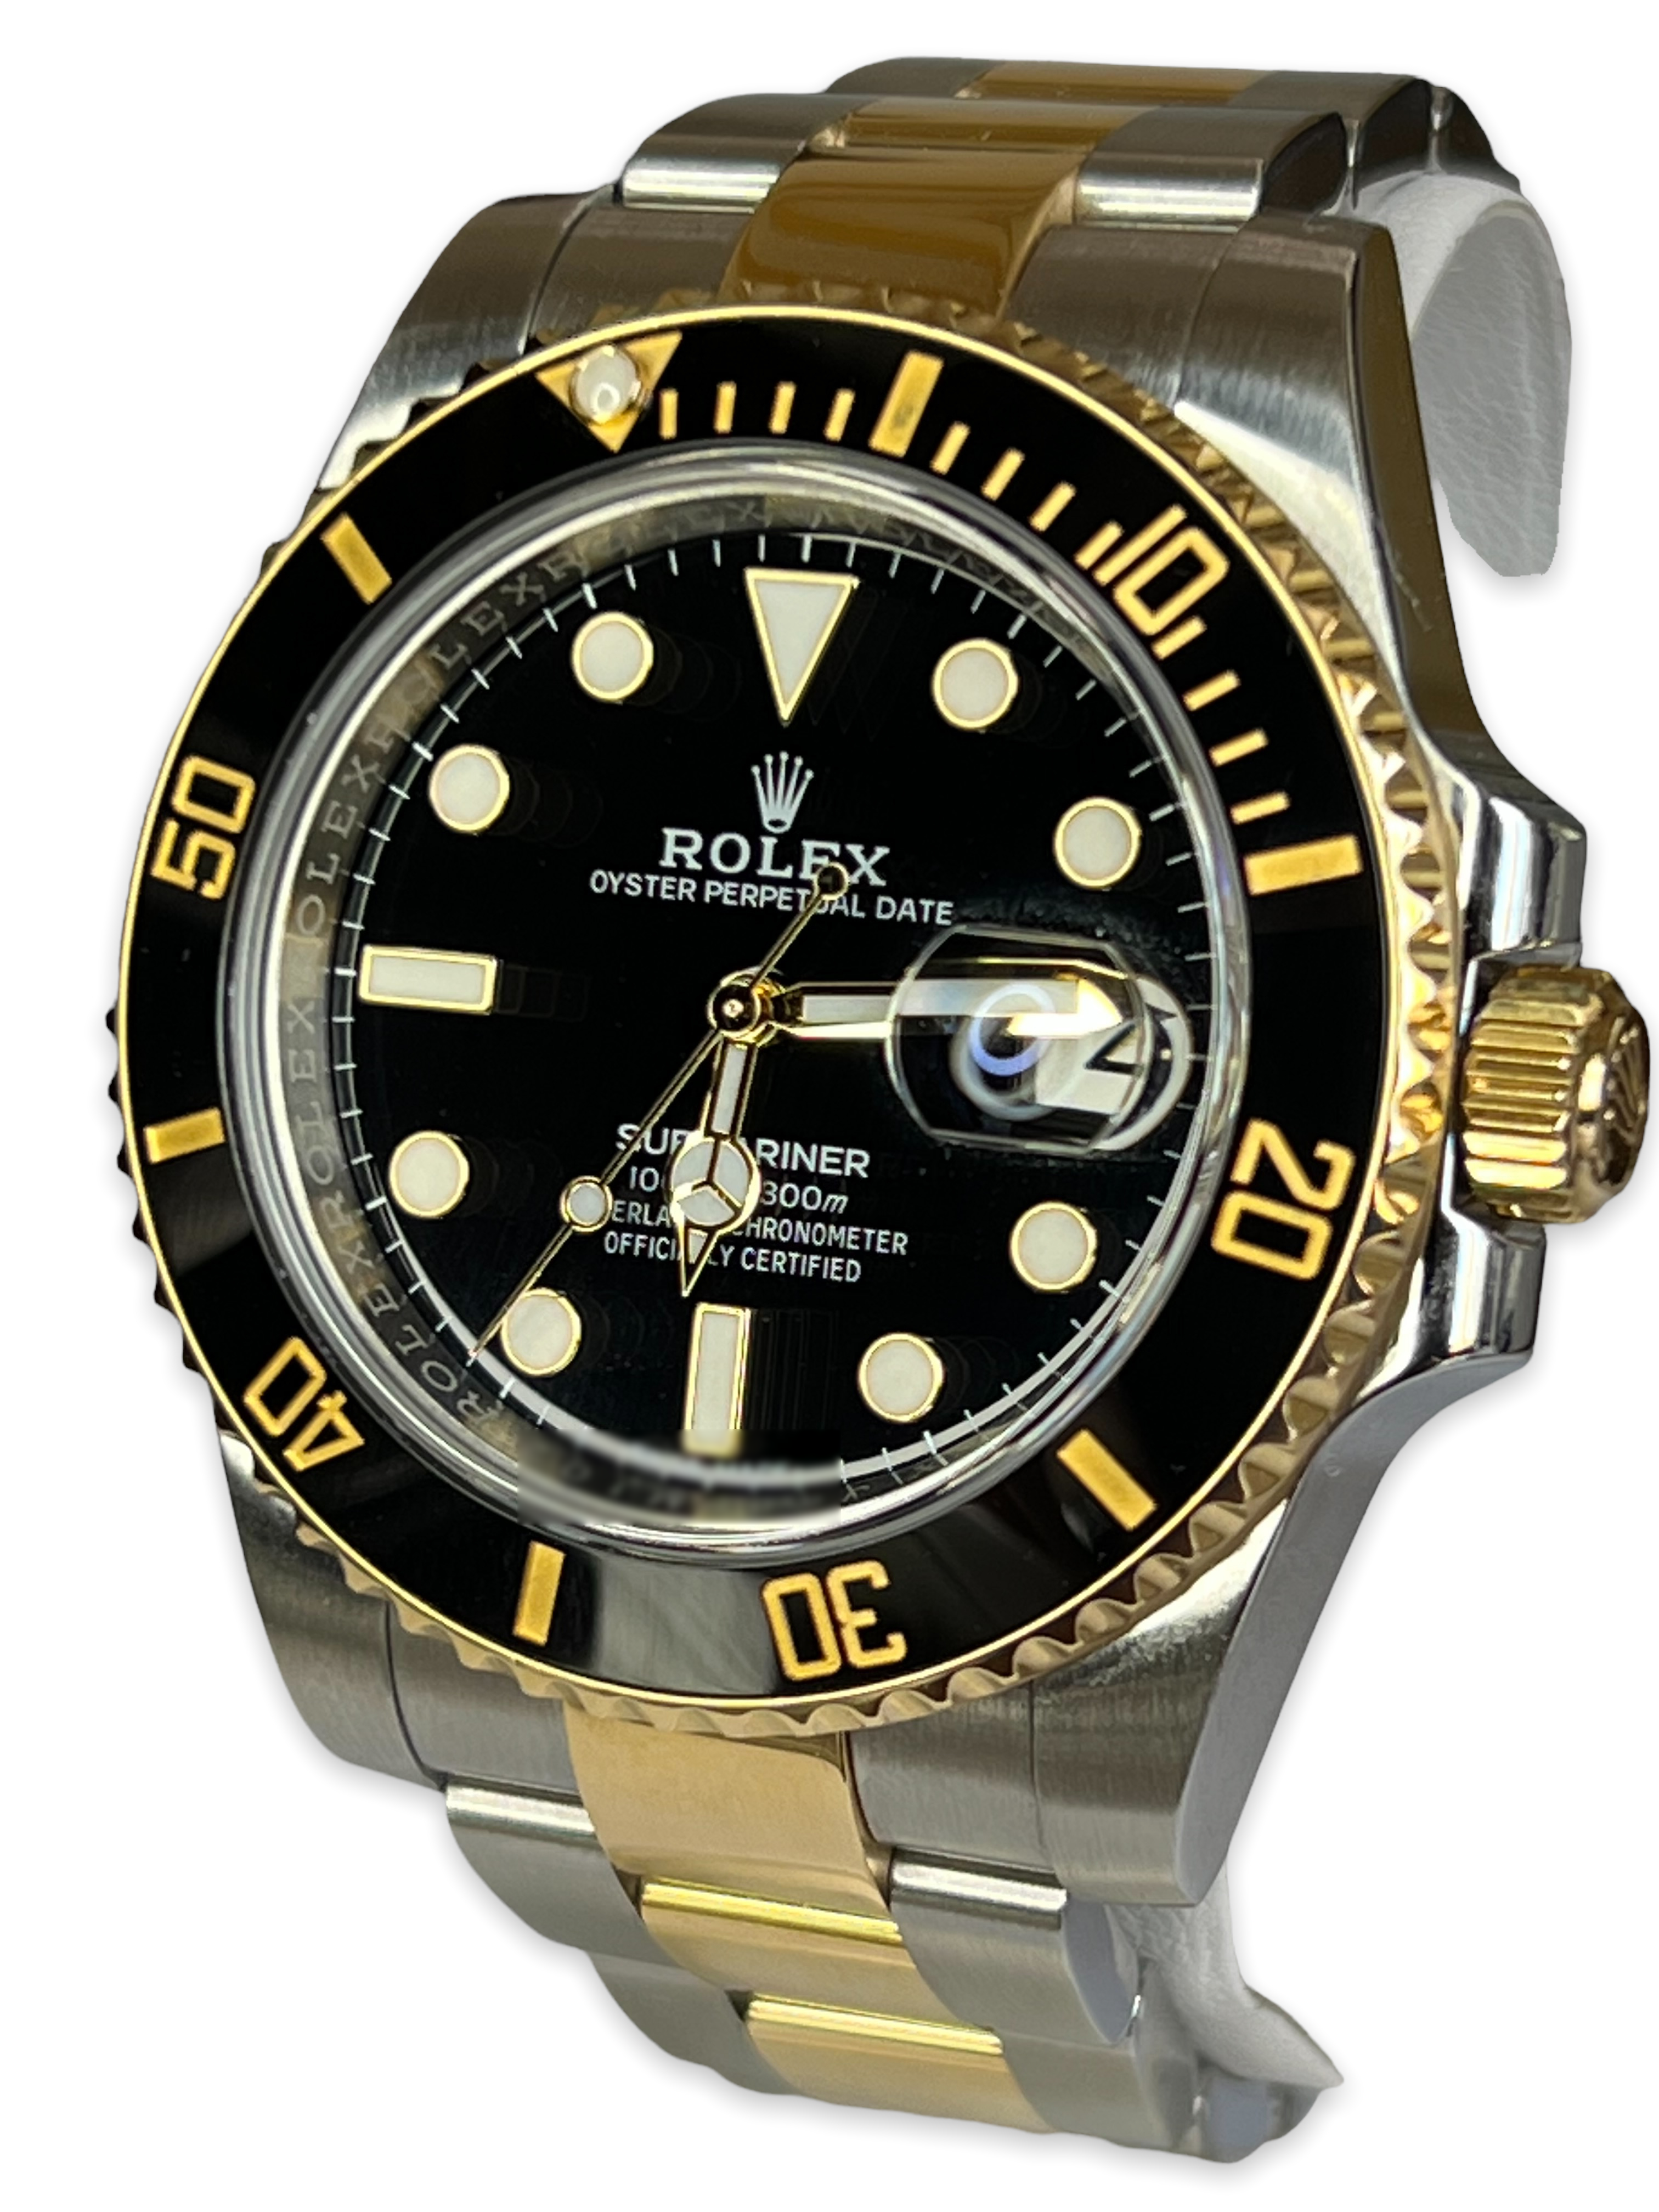 ROLEX SUBMARINER DATE 40MM CERAMIC BEZEL TWO-TONE STAINLESS STEEL&GOLD BLACK DIAL REF: 116613